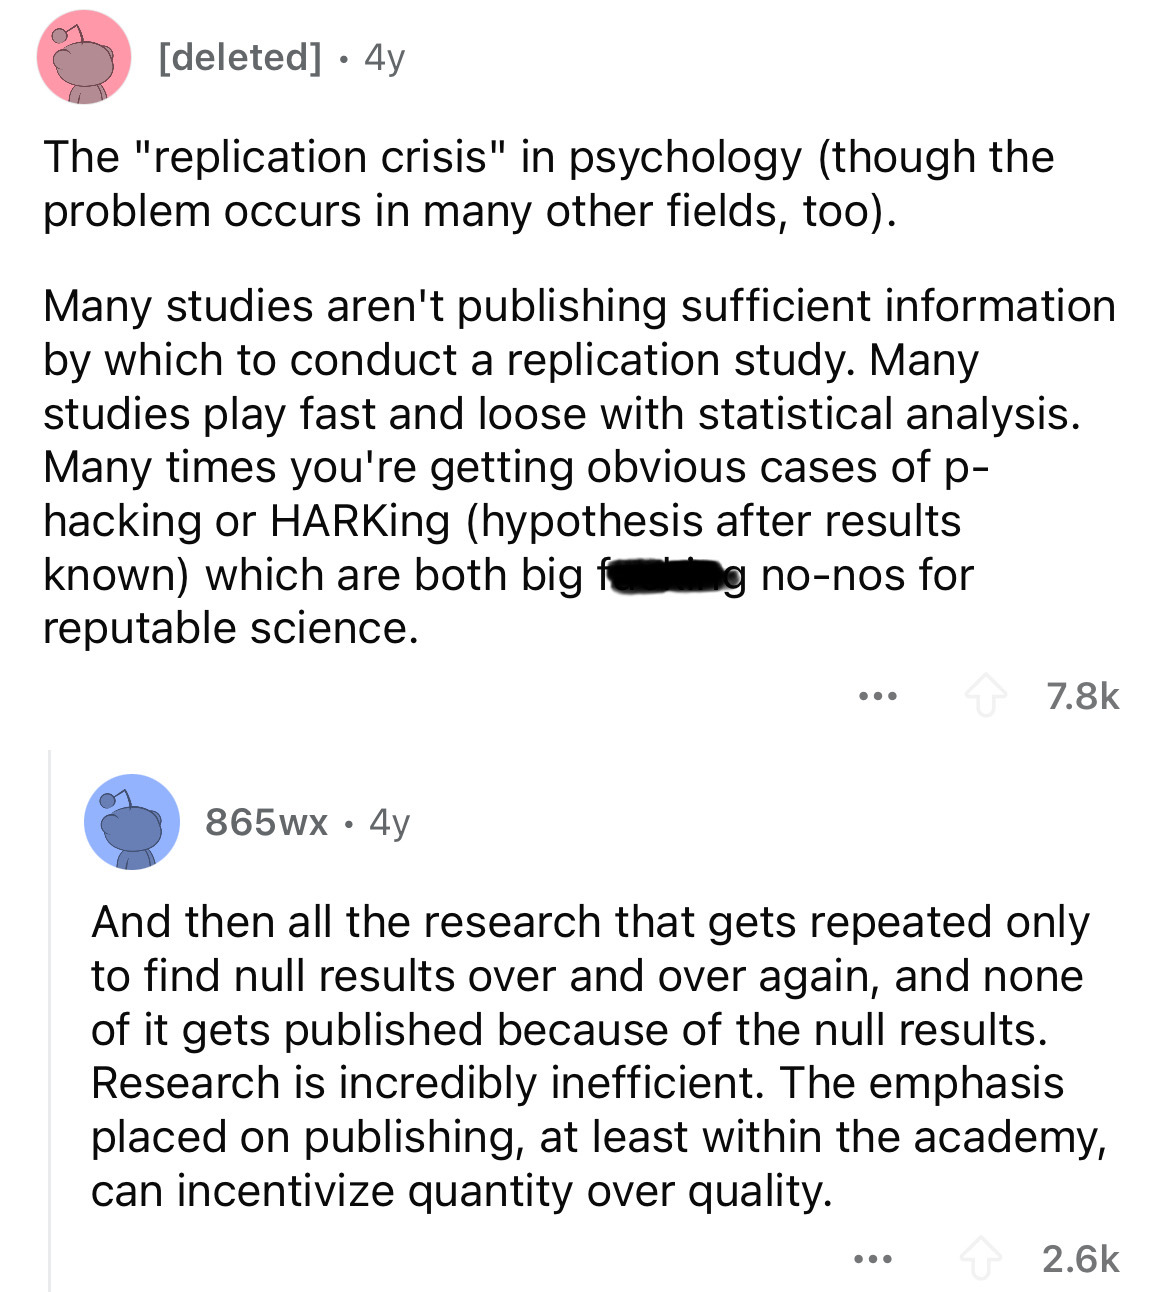 screenshot - deleted 4y The "replication crisis" in psychology though the problem occurs in many other fields, too. Many studies aren't publishing sufficient information by which to conduct a replication study. Many studies play fast and loose with statis